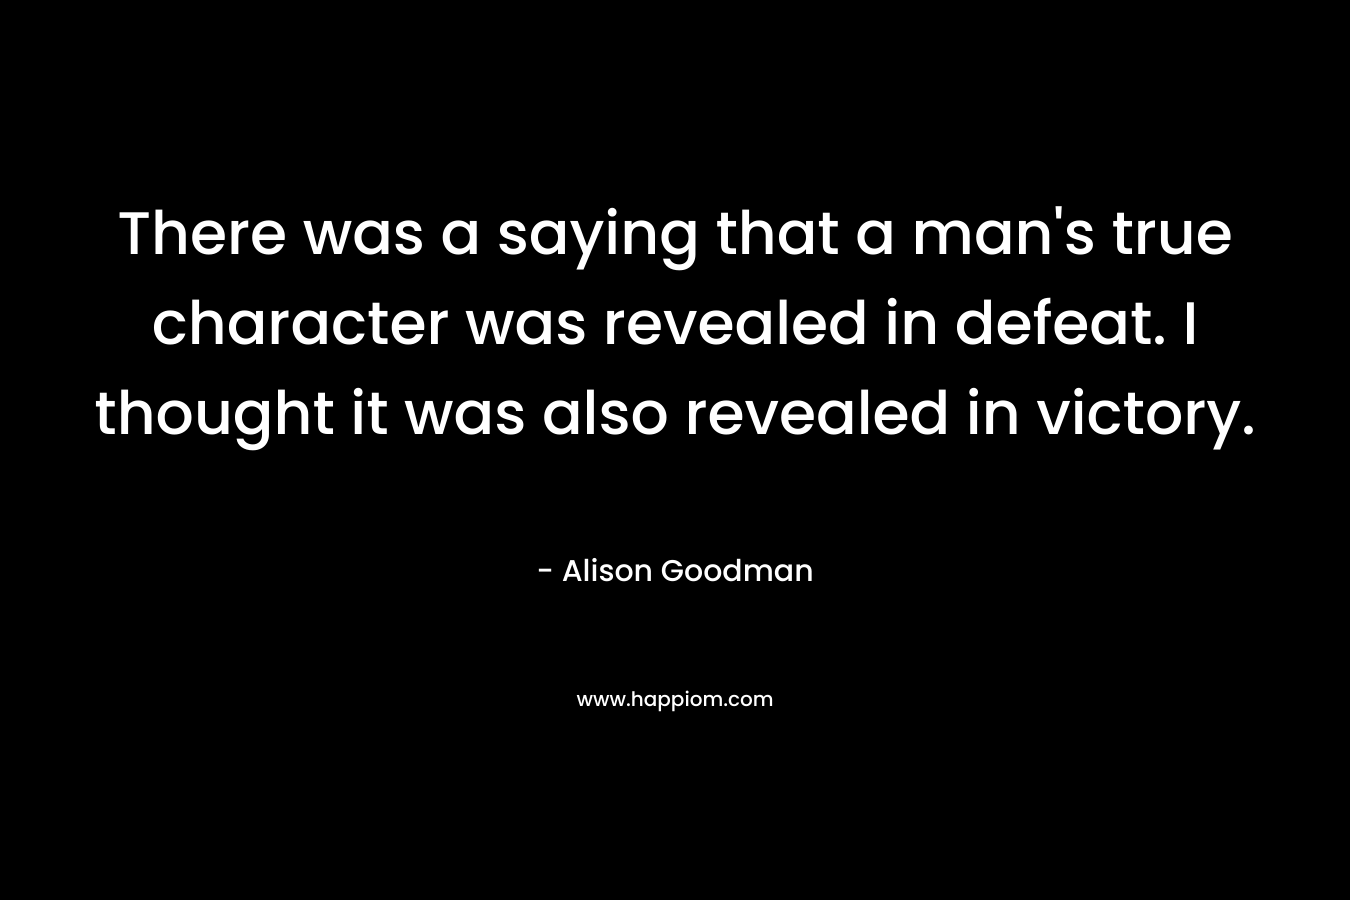 There was a saying that a man's true character was revealed in defeat. I thought it was also revealed in victory.